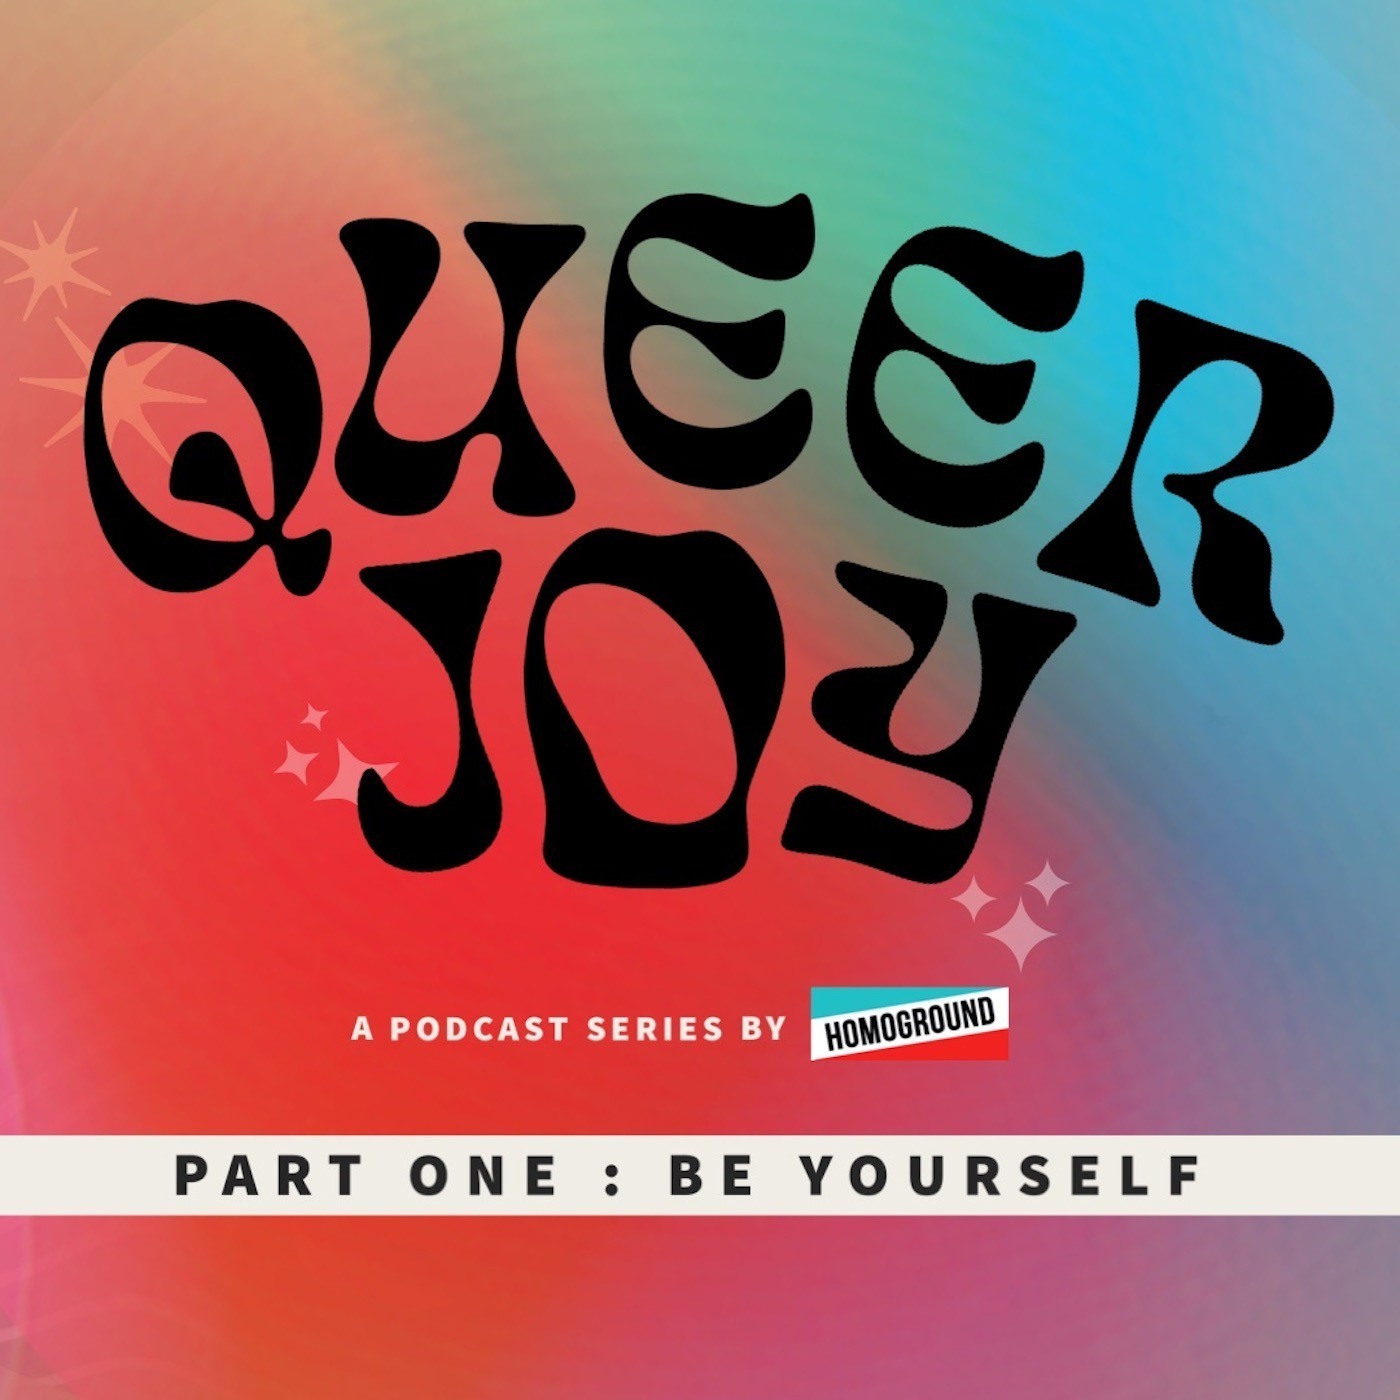 Queer Joy Part 1: ”Be Yourself” Featuring Papa Molly, JayceJanae, Boy Bowser, Kamerin [#273]